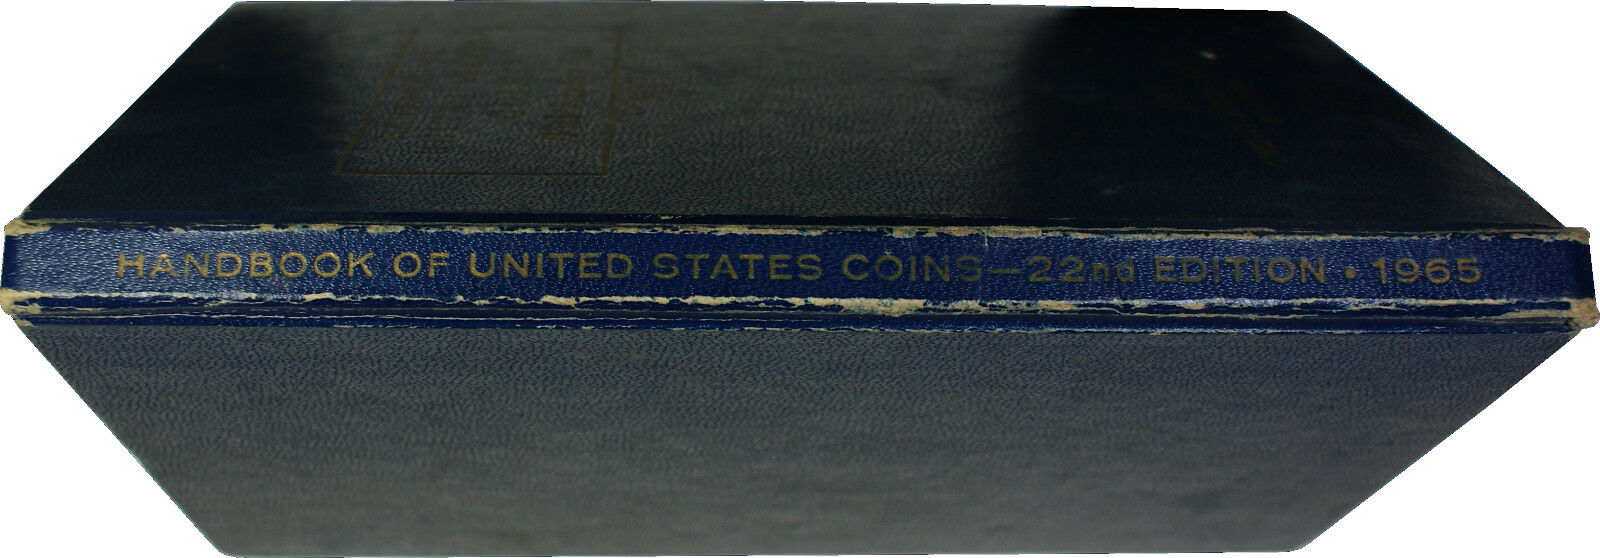 1965 22nd Edition Blue Book Handbook of United states Coins R.S. Yeoman